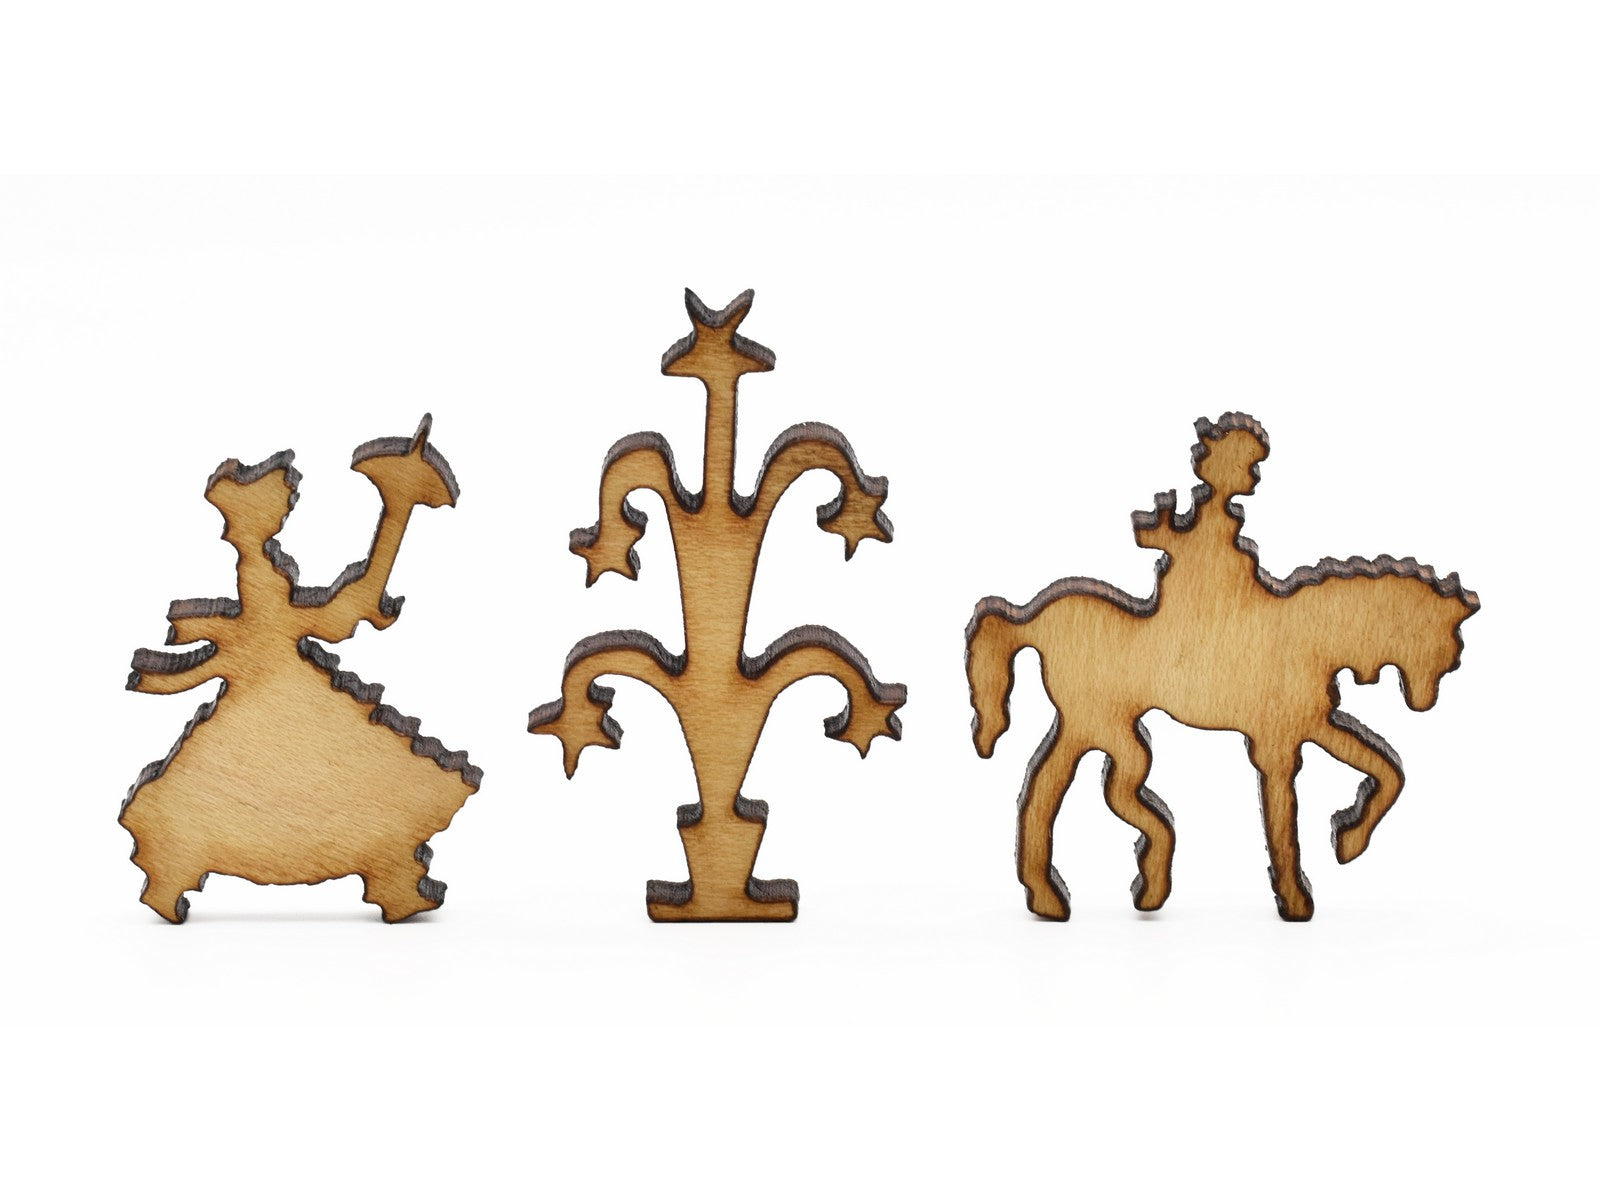 A closeup of pieces in the shape of a woman, a fountain, and a person riding a horse.